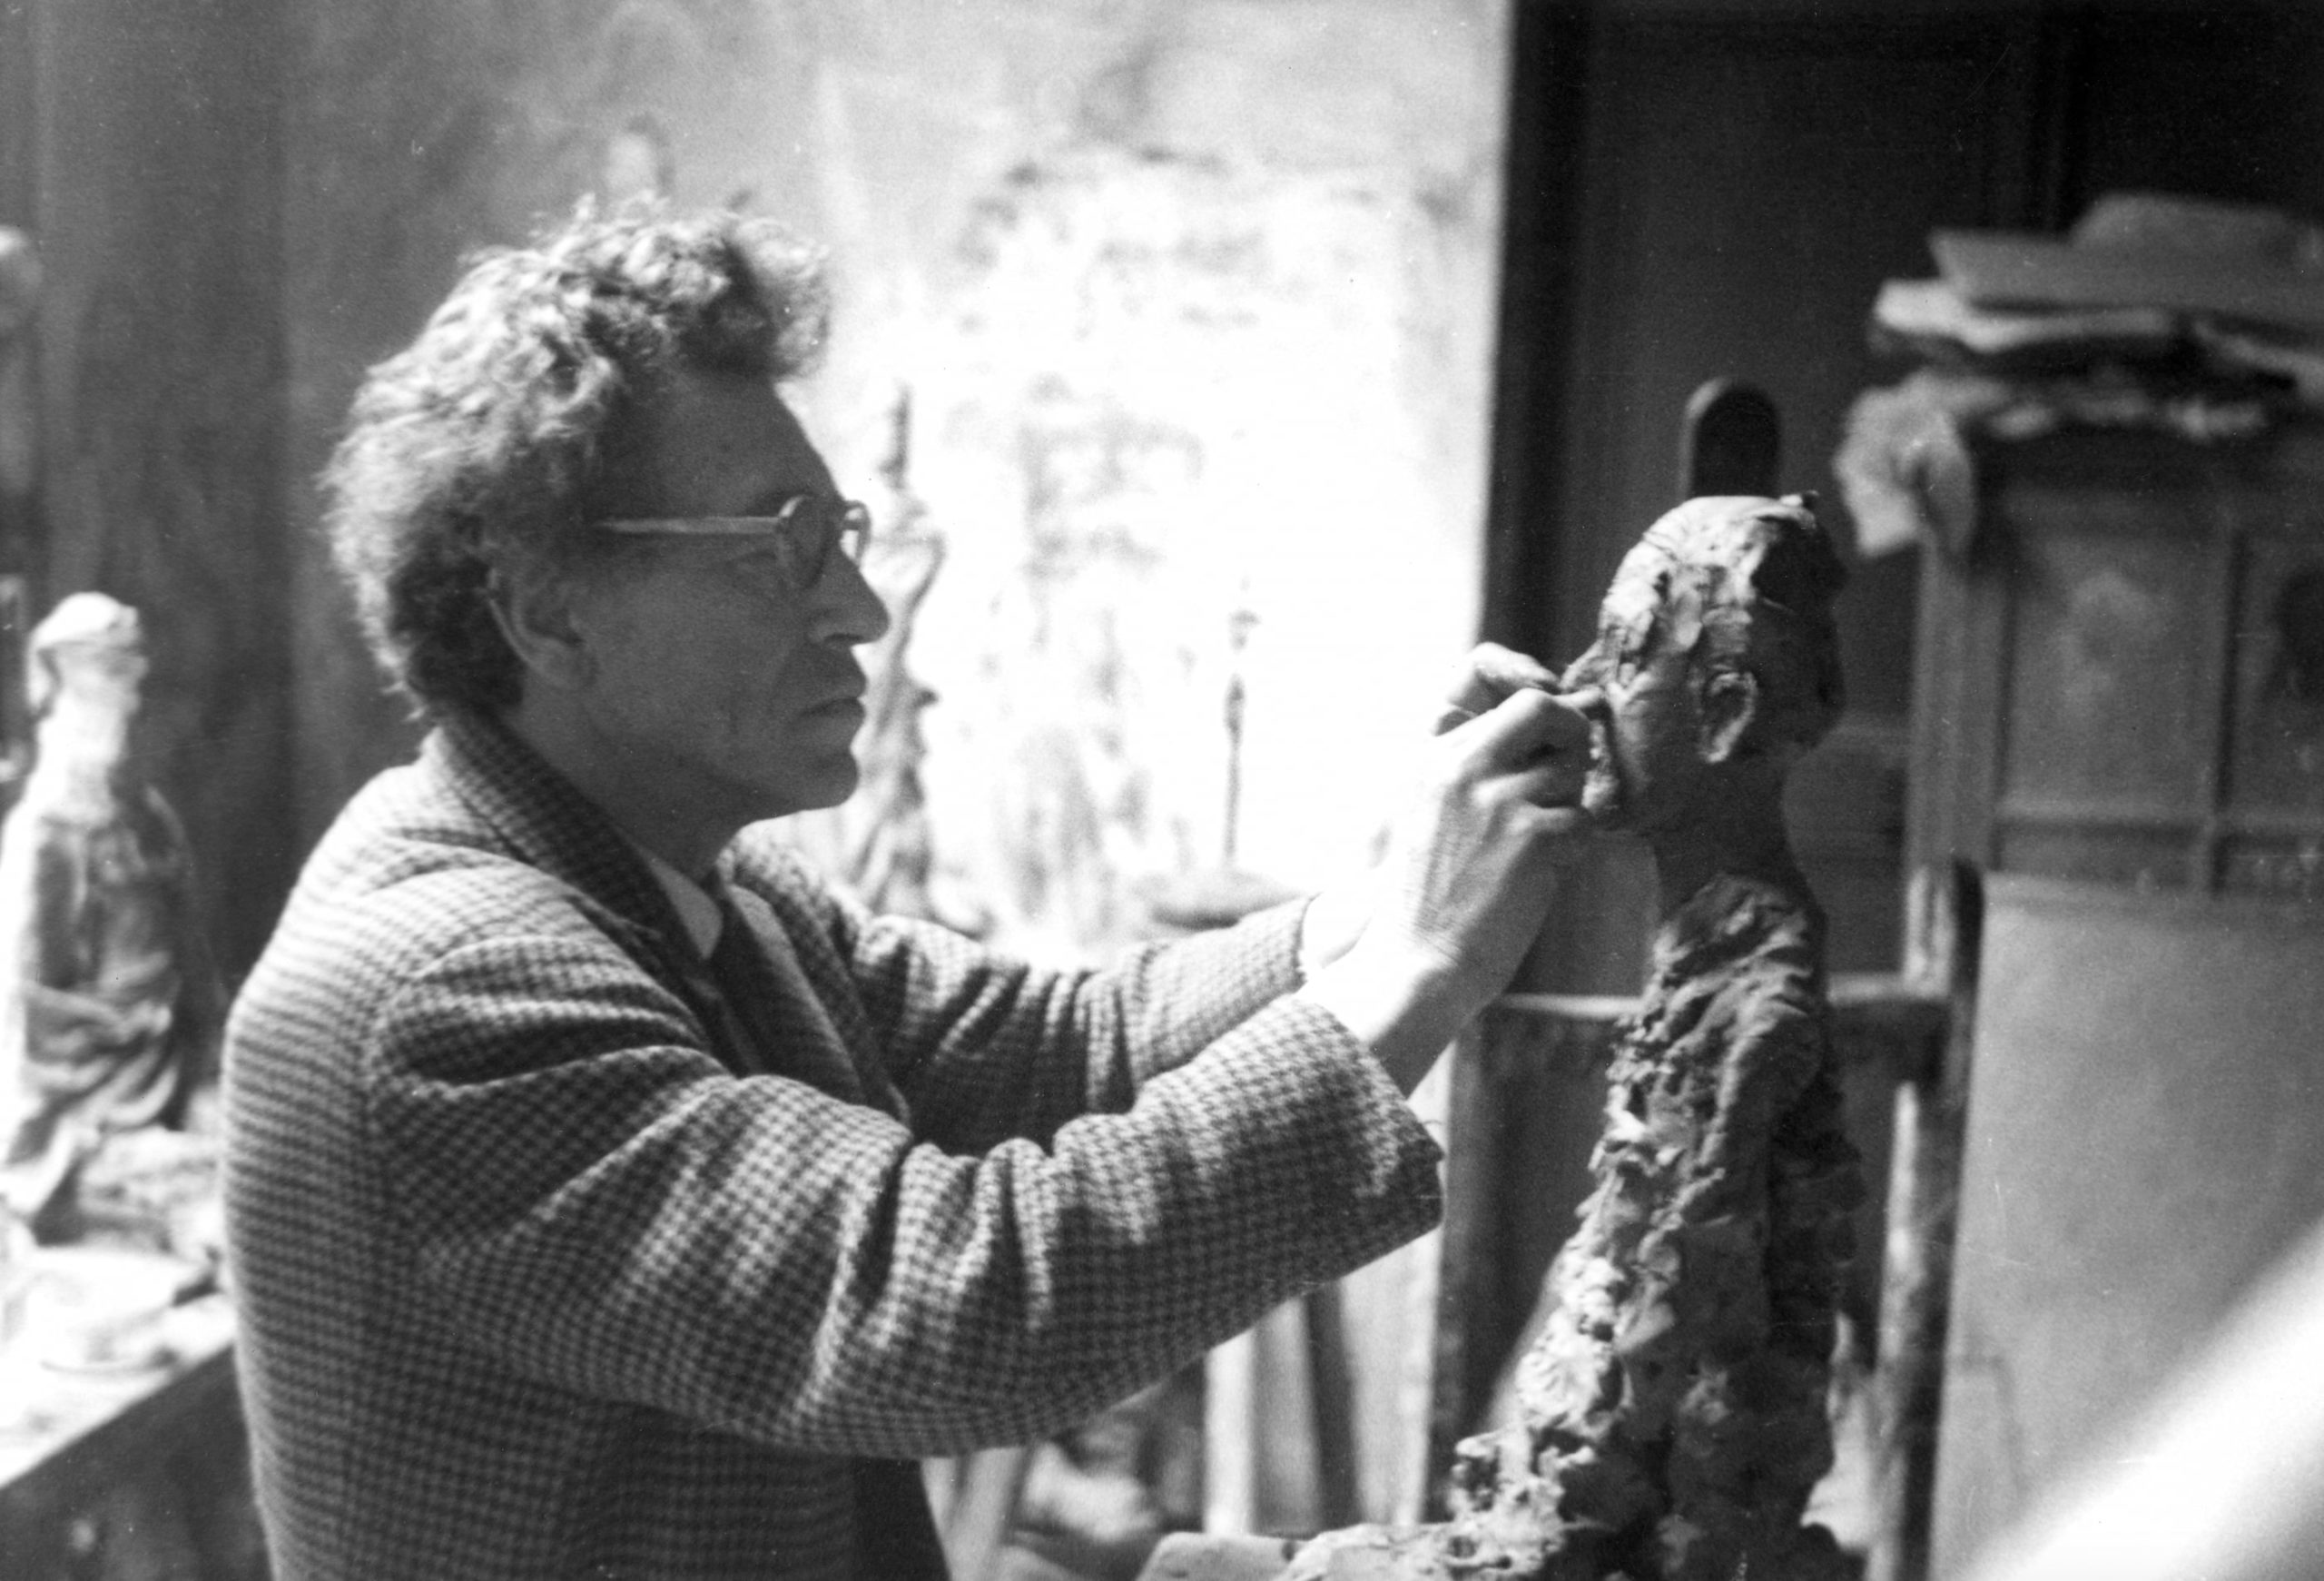 Sartre and Giacometti: words between friends